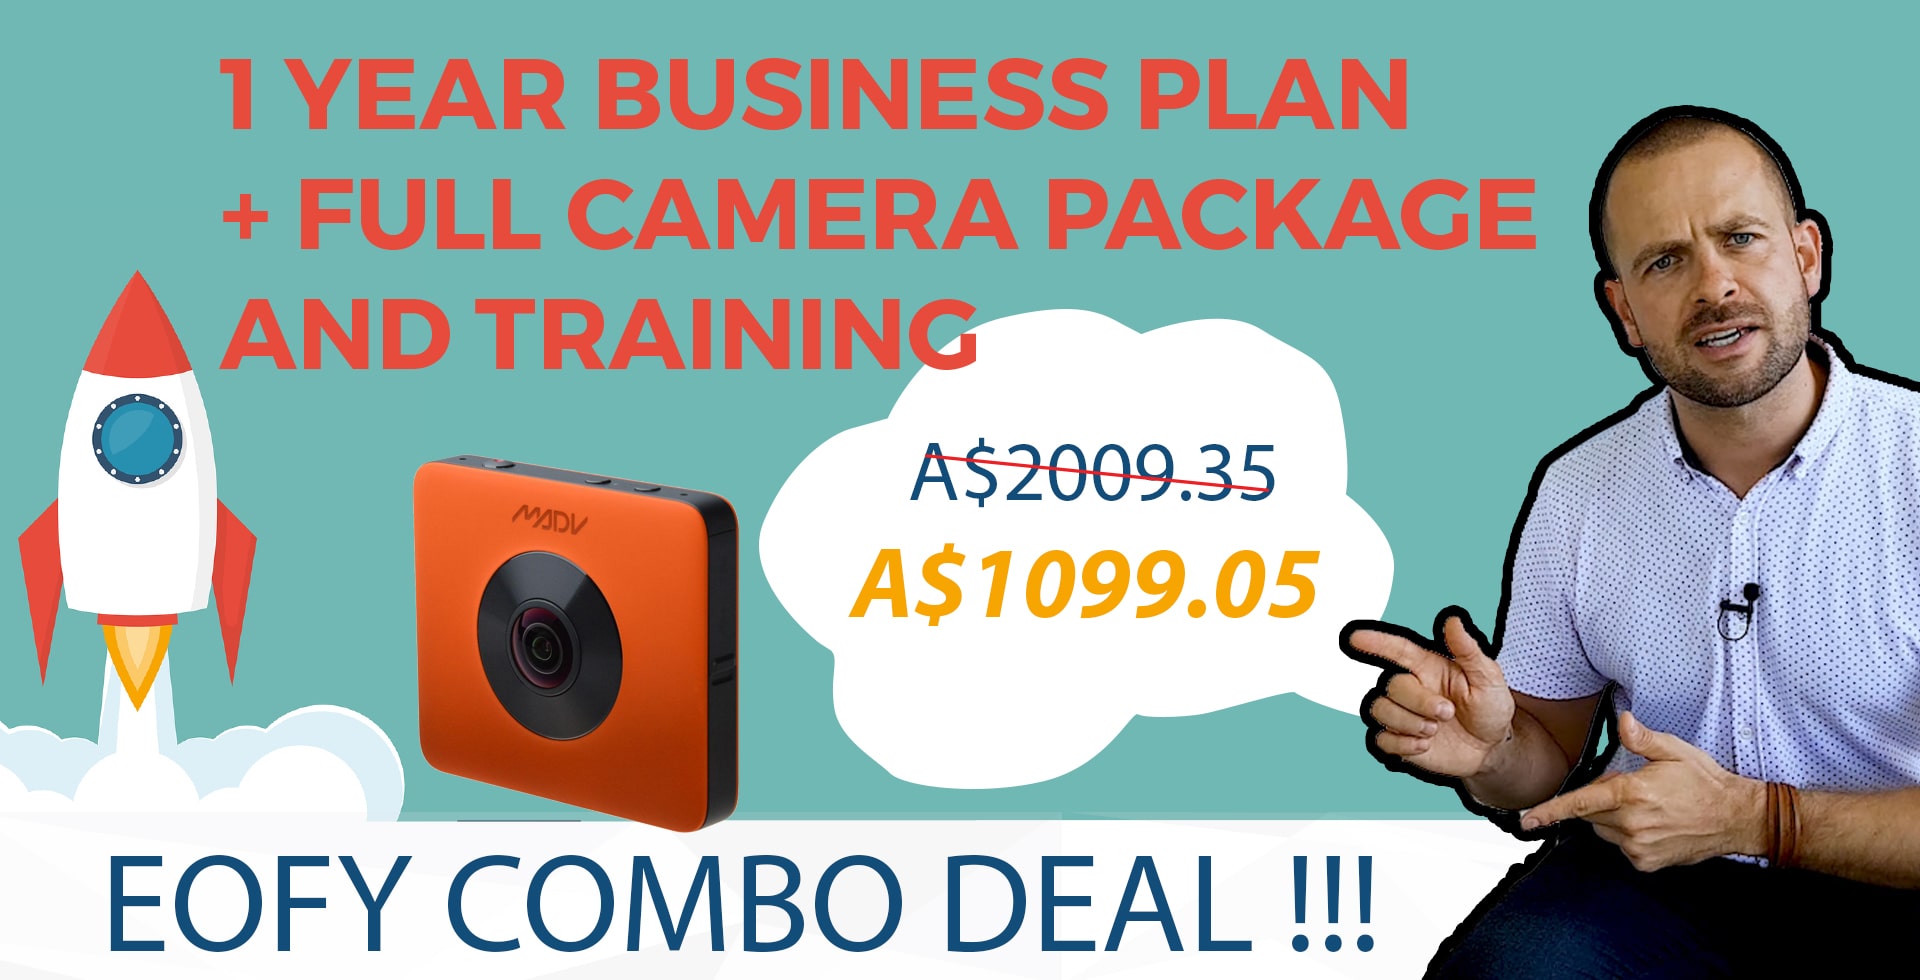 https://campaign-image.com/zohocampaigns/446813000006419006_zc_v16_1_year_business_plan___full_camera_package__and_training_banner_min.jpg